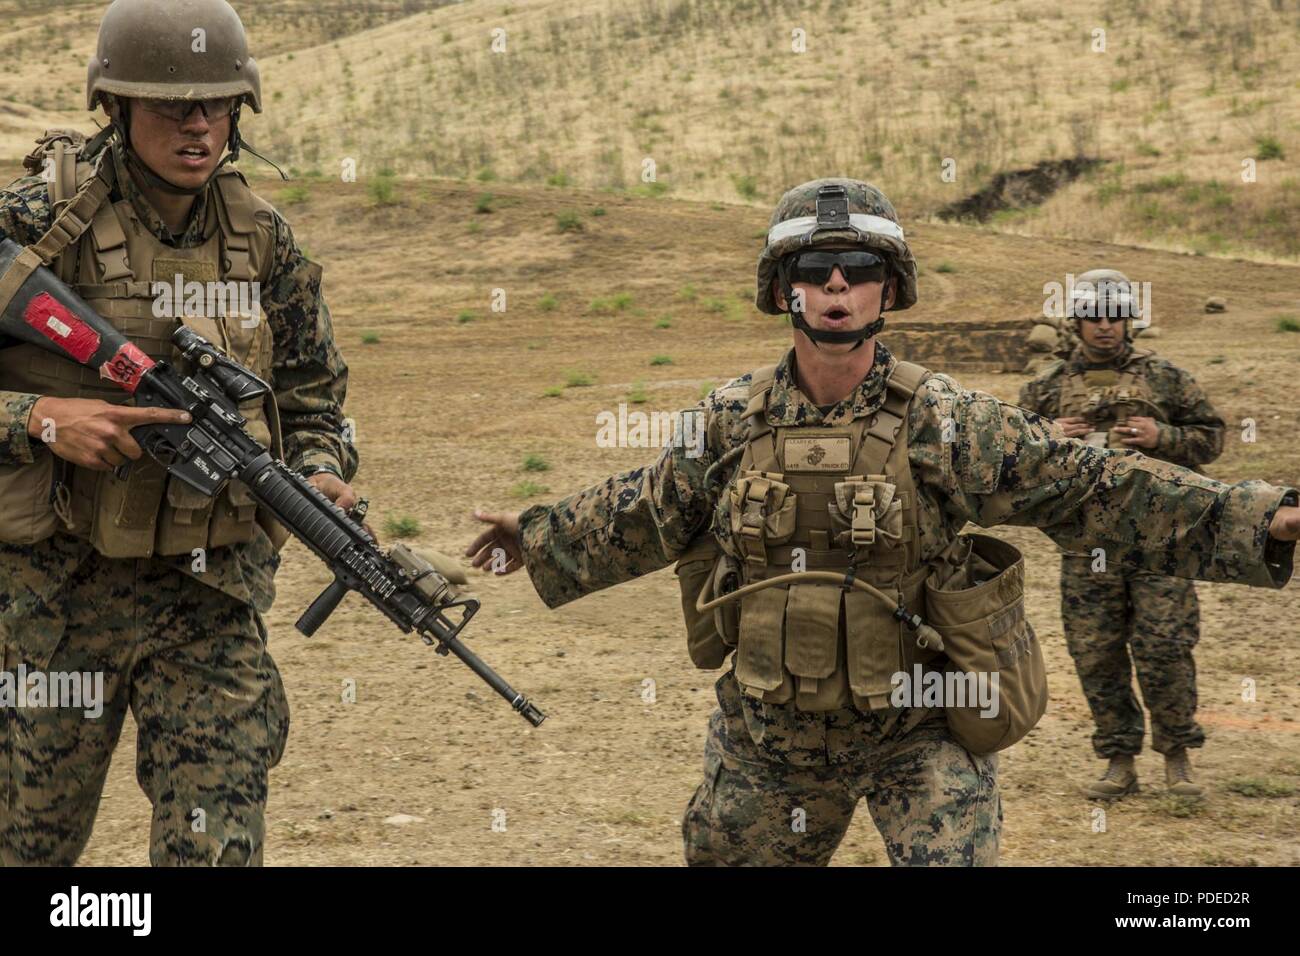 U.S. Marine Corps Sgt. Kathrine E. Cleary, right, combat instructor, School of Infantry (SOI)-West, directs students attending Marine Combat Training (MCT) off of a rifle range at the Marine Corps SOI-West, Camp Pendleton, Calif., May 18, 2018. MCT gives Marines with Military Occupational Specialties other than Infantry (03xx) a basic understanding of the Marine Corps' warfighting ethos, core values, basic tenets of maneuver warfare, leadership responsibilities, mental, moral, and physical resiliency in order to contribute to the successful accomplishment of their unit's mission. Stock Photo